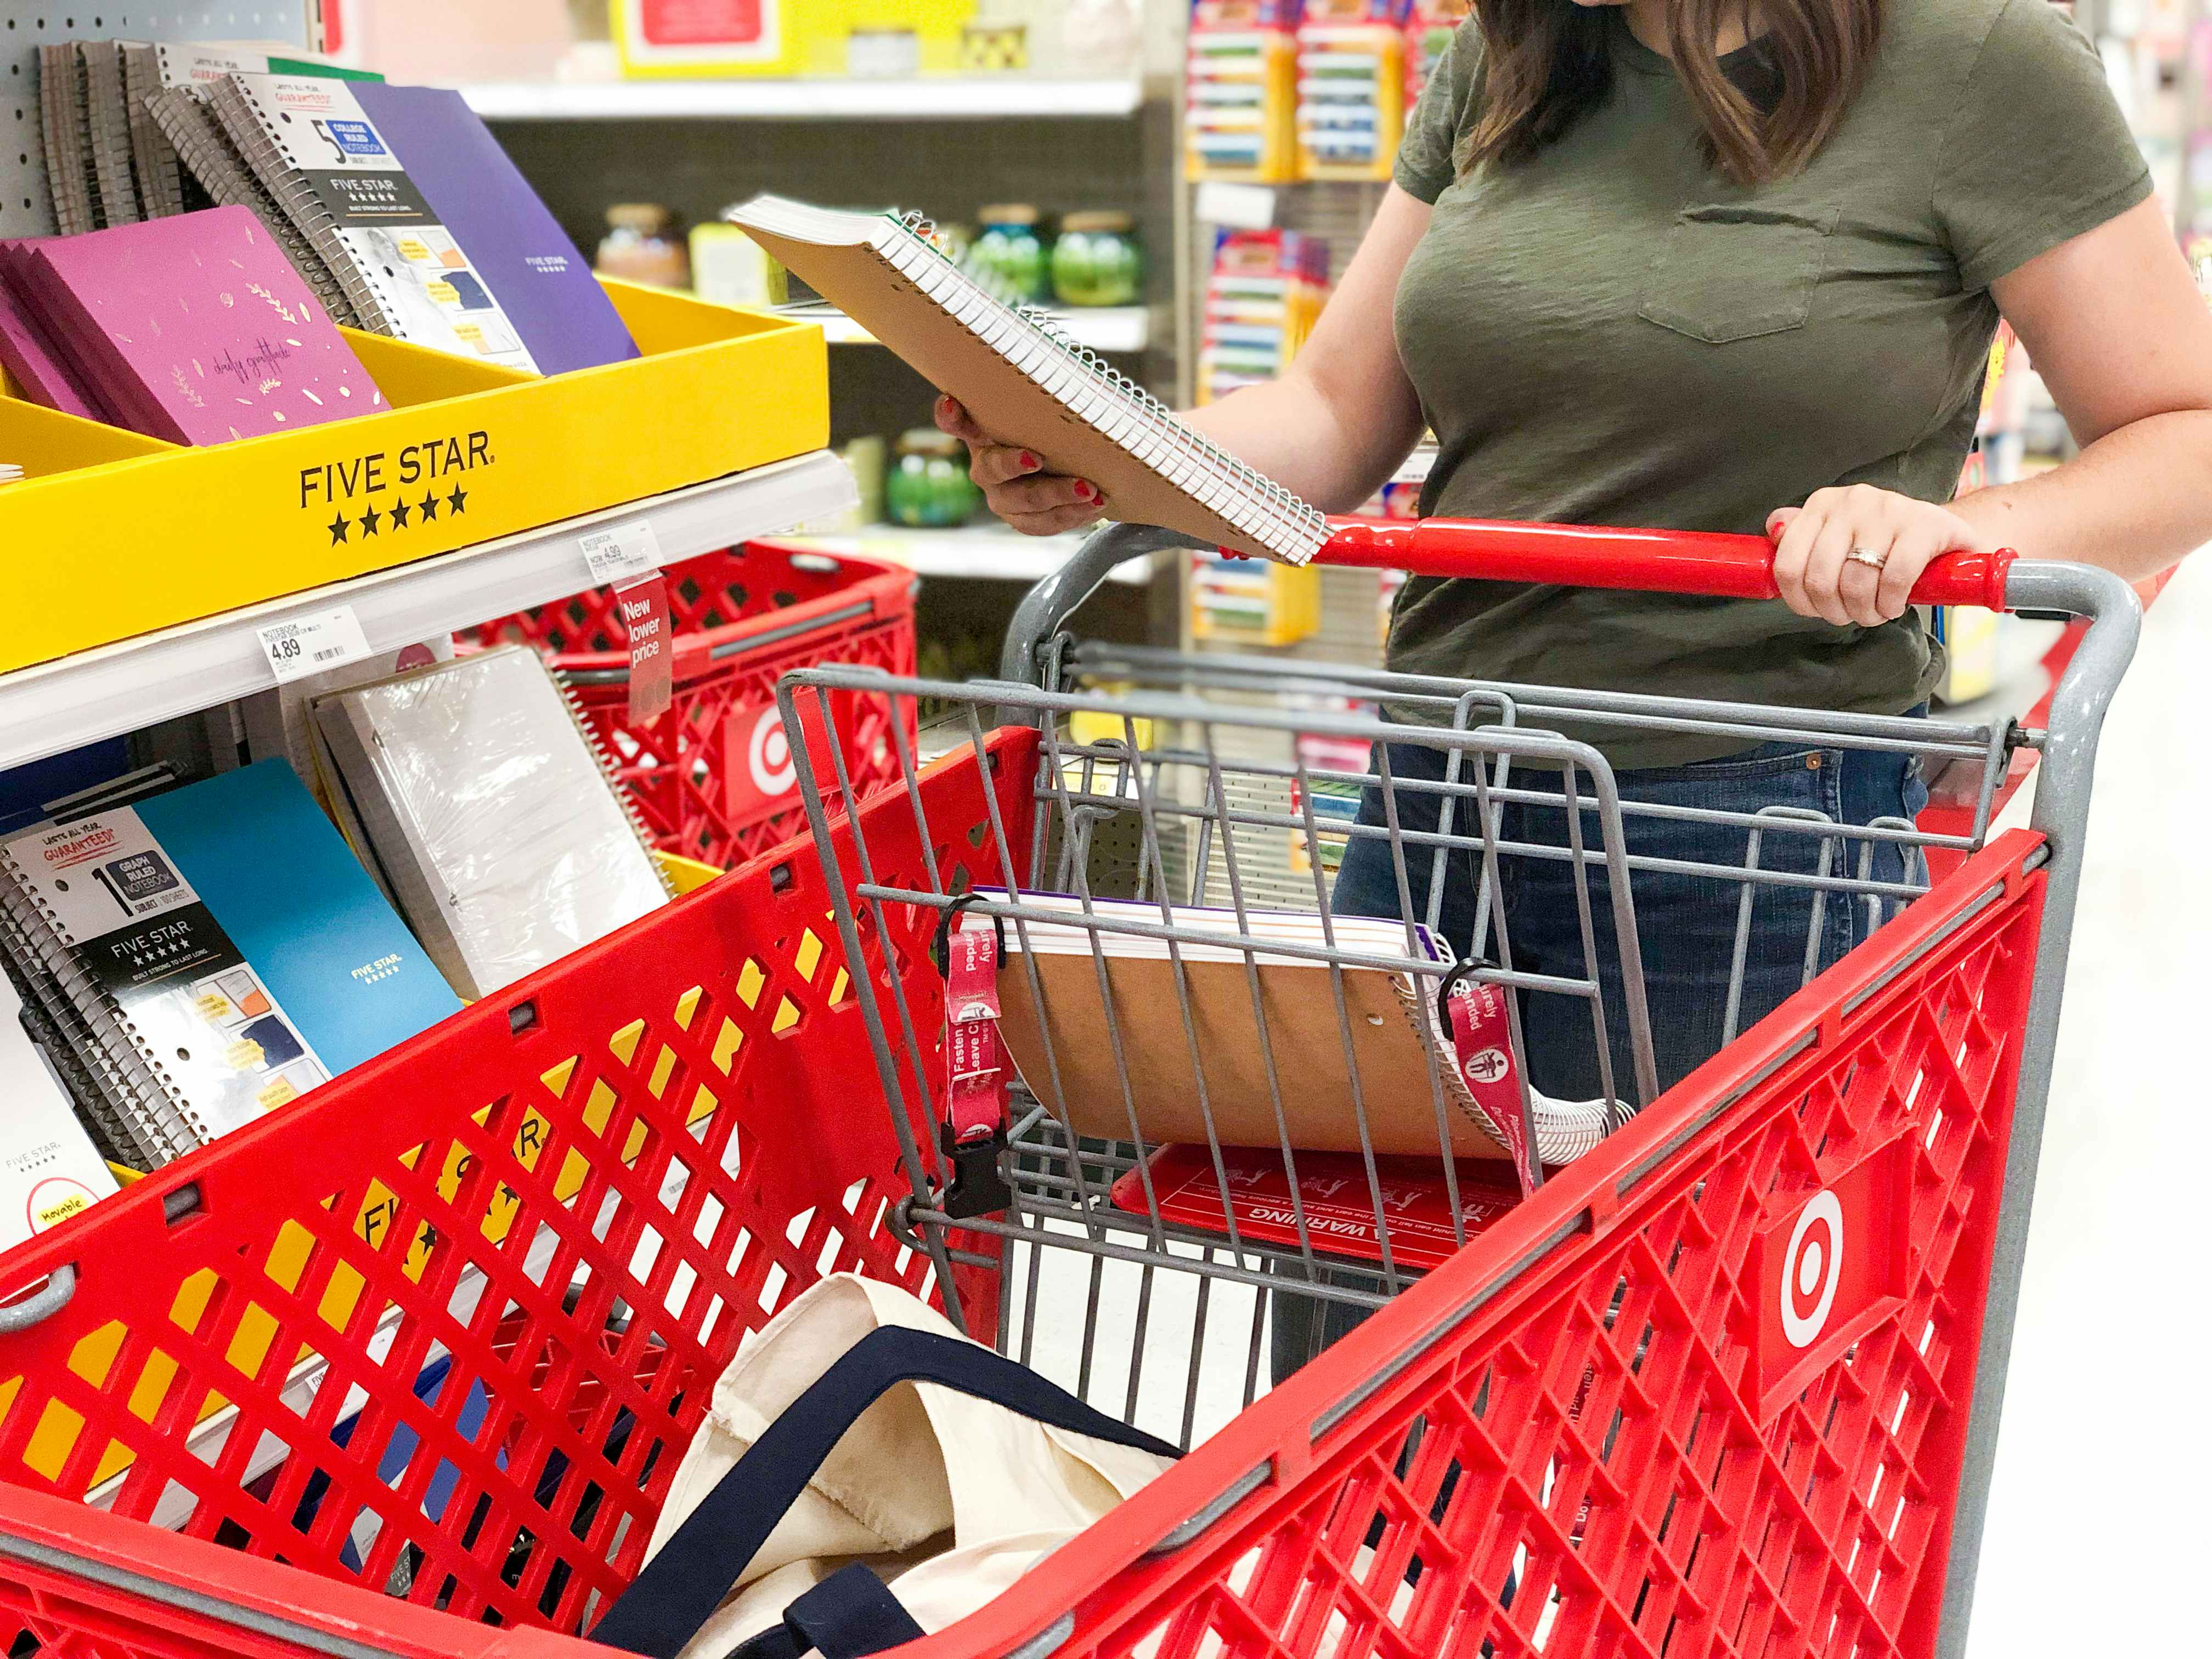 A woman pushing a target shopping cart and holding a five star notebook in her hand